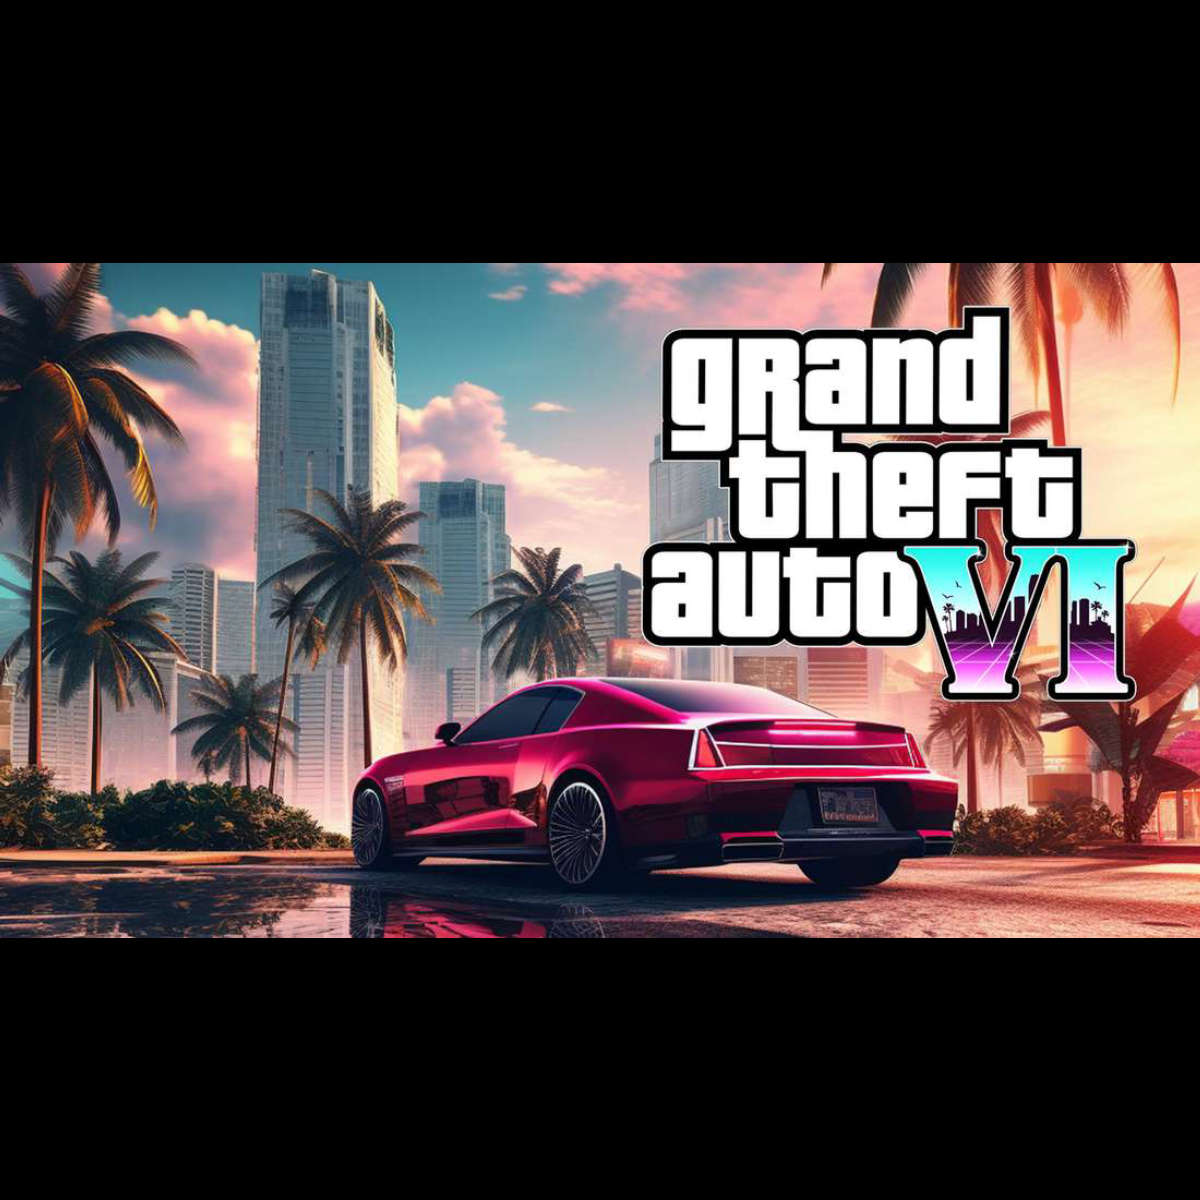 Arion Kurtaj: The alleged teenager behind GTA 6 leaks and other